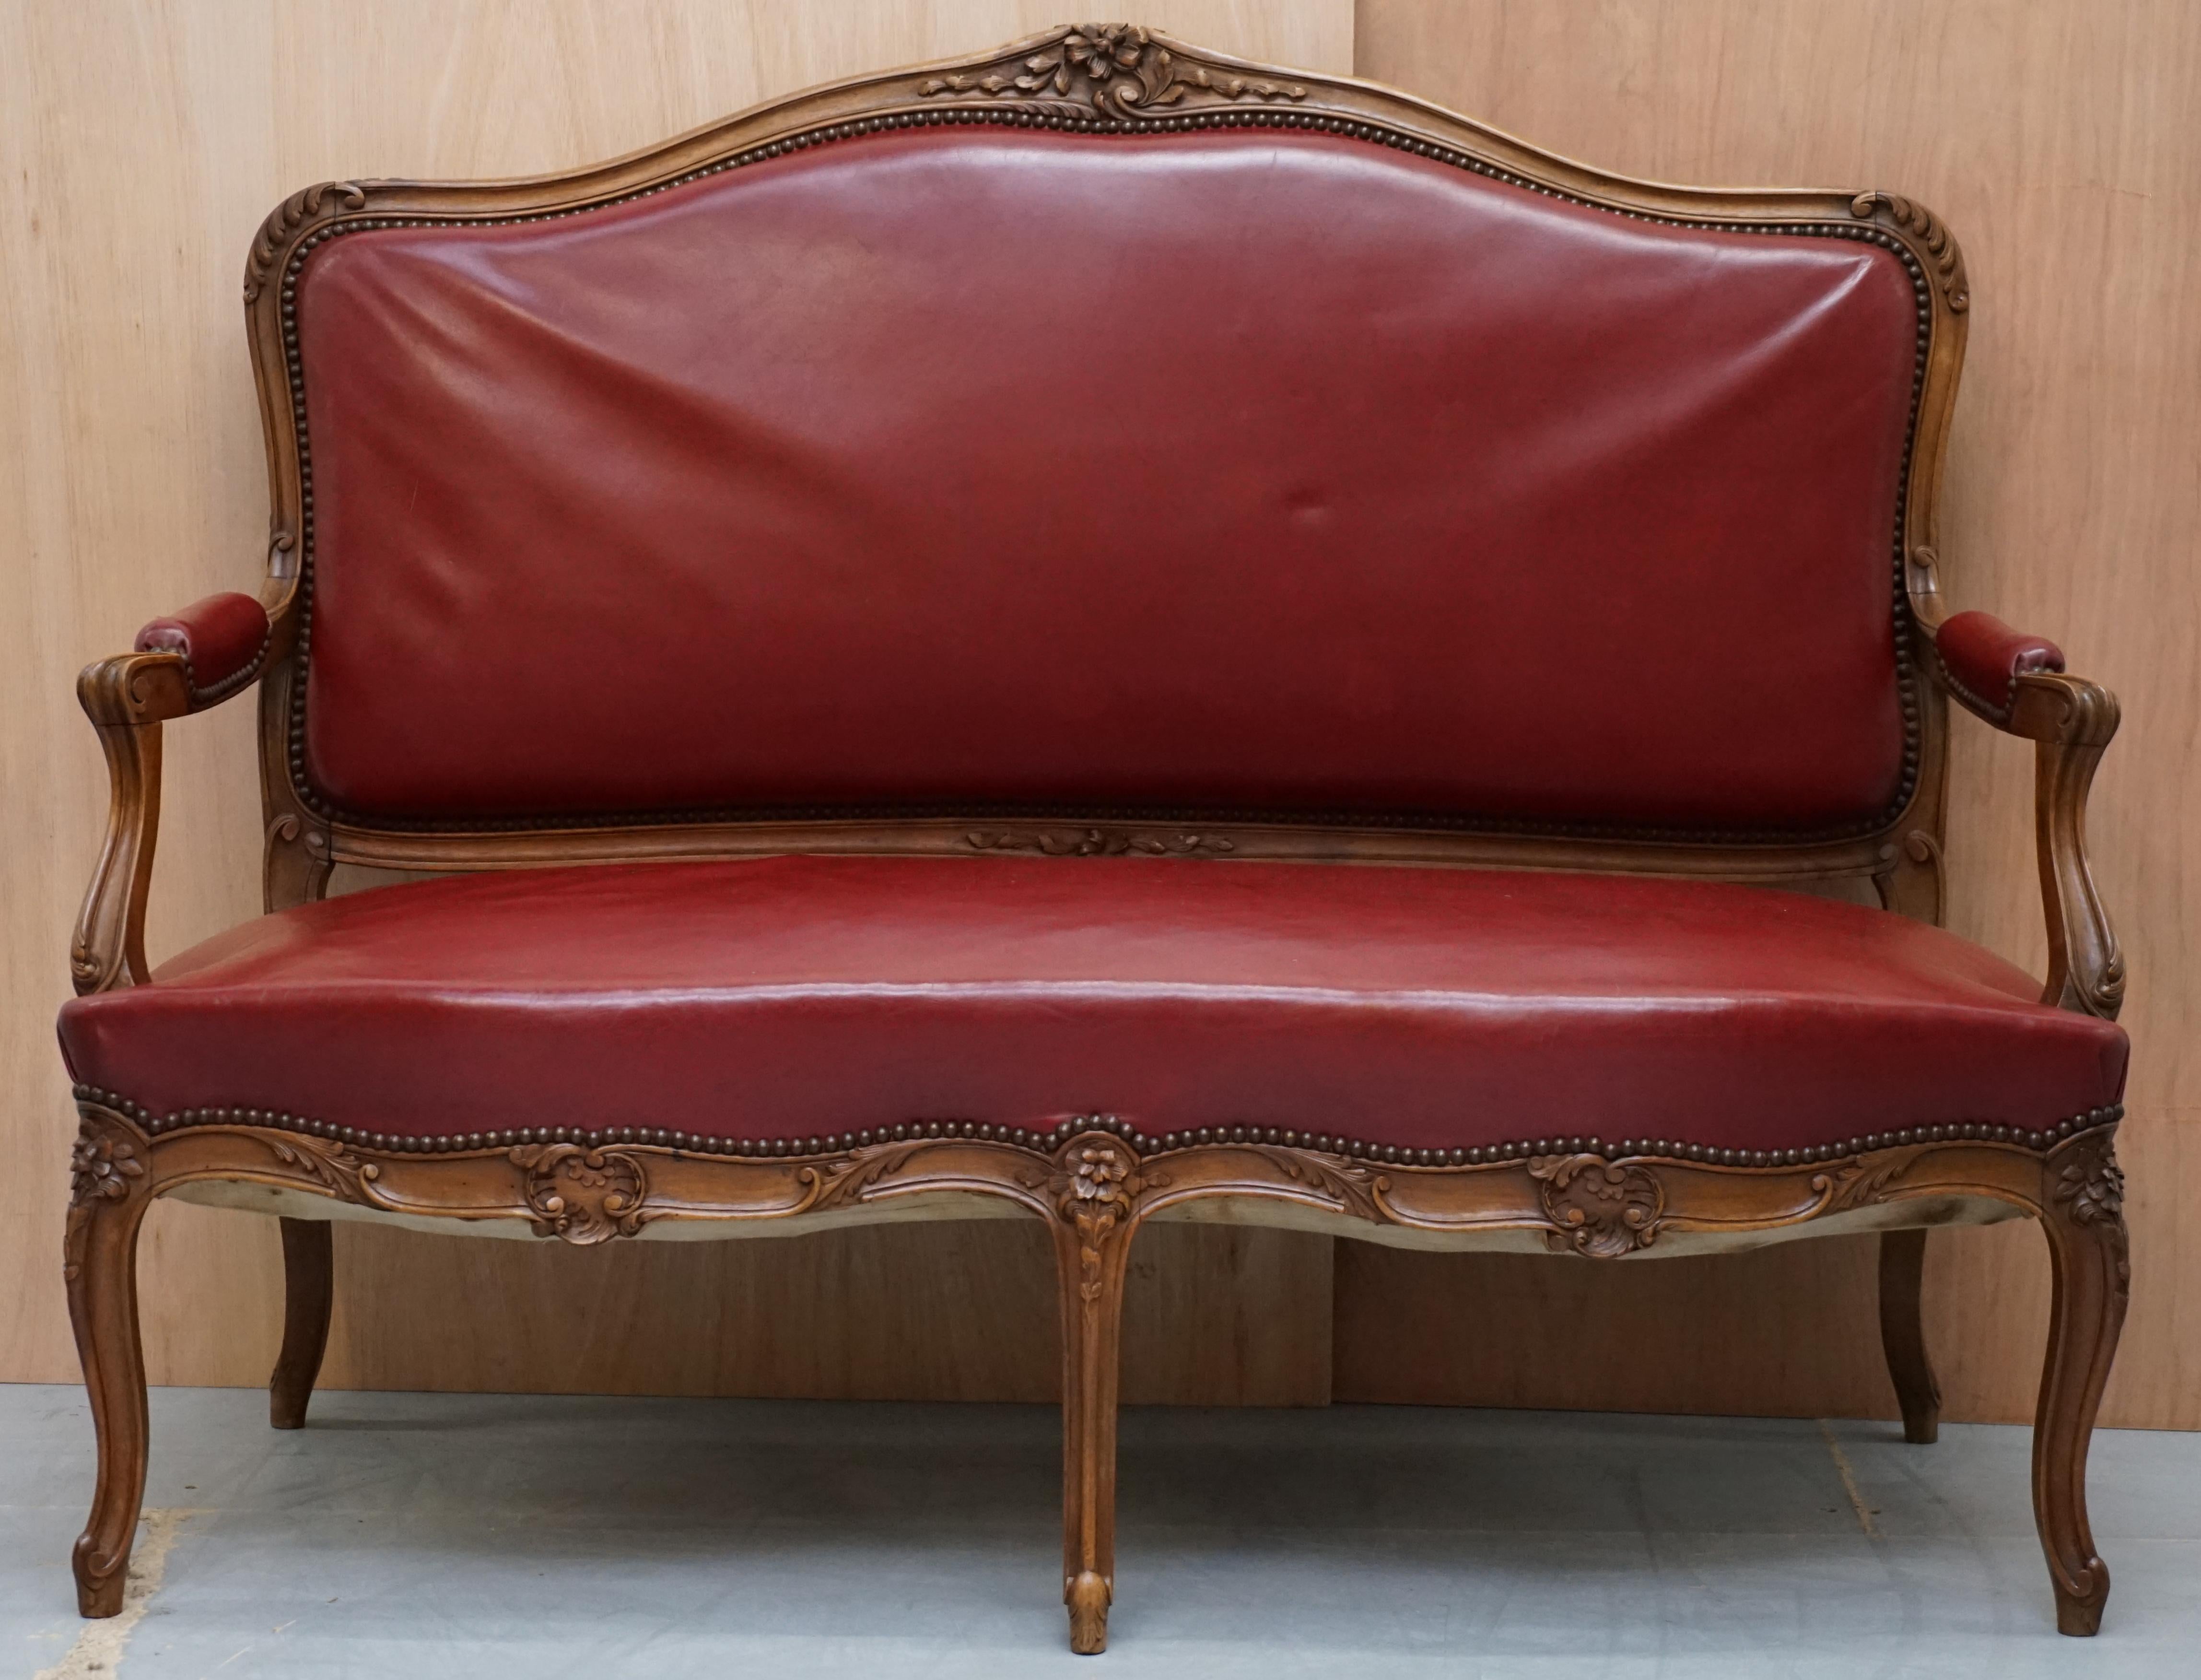 Hand-Crafted Oxblood Leather French Louis XV Style Salon Suite Walnut Armchairs & Sofa Settee For Sale